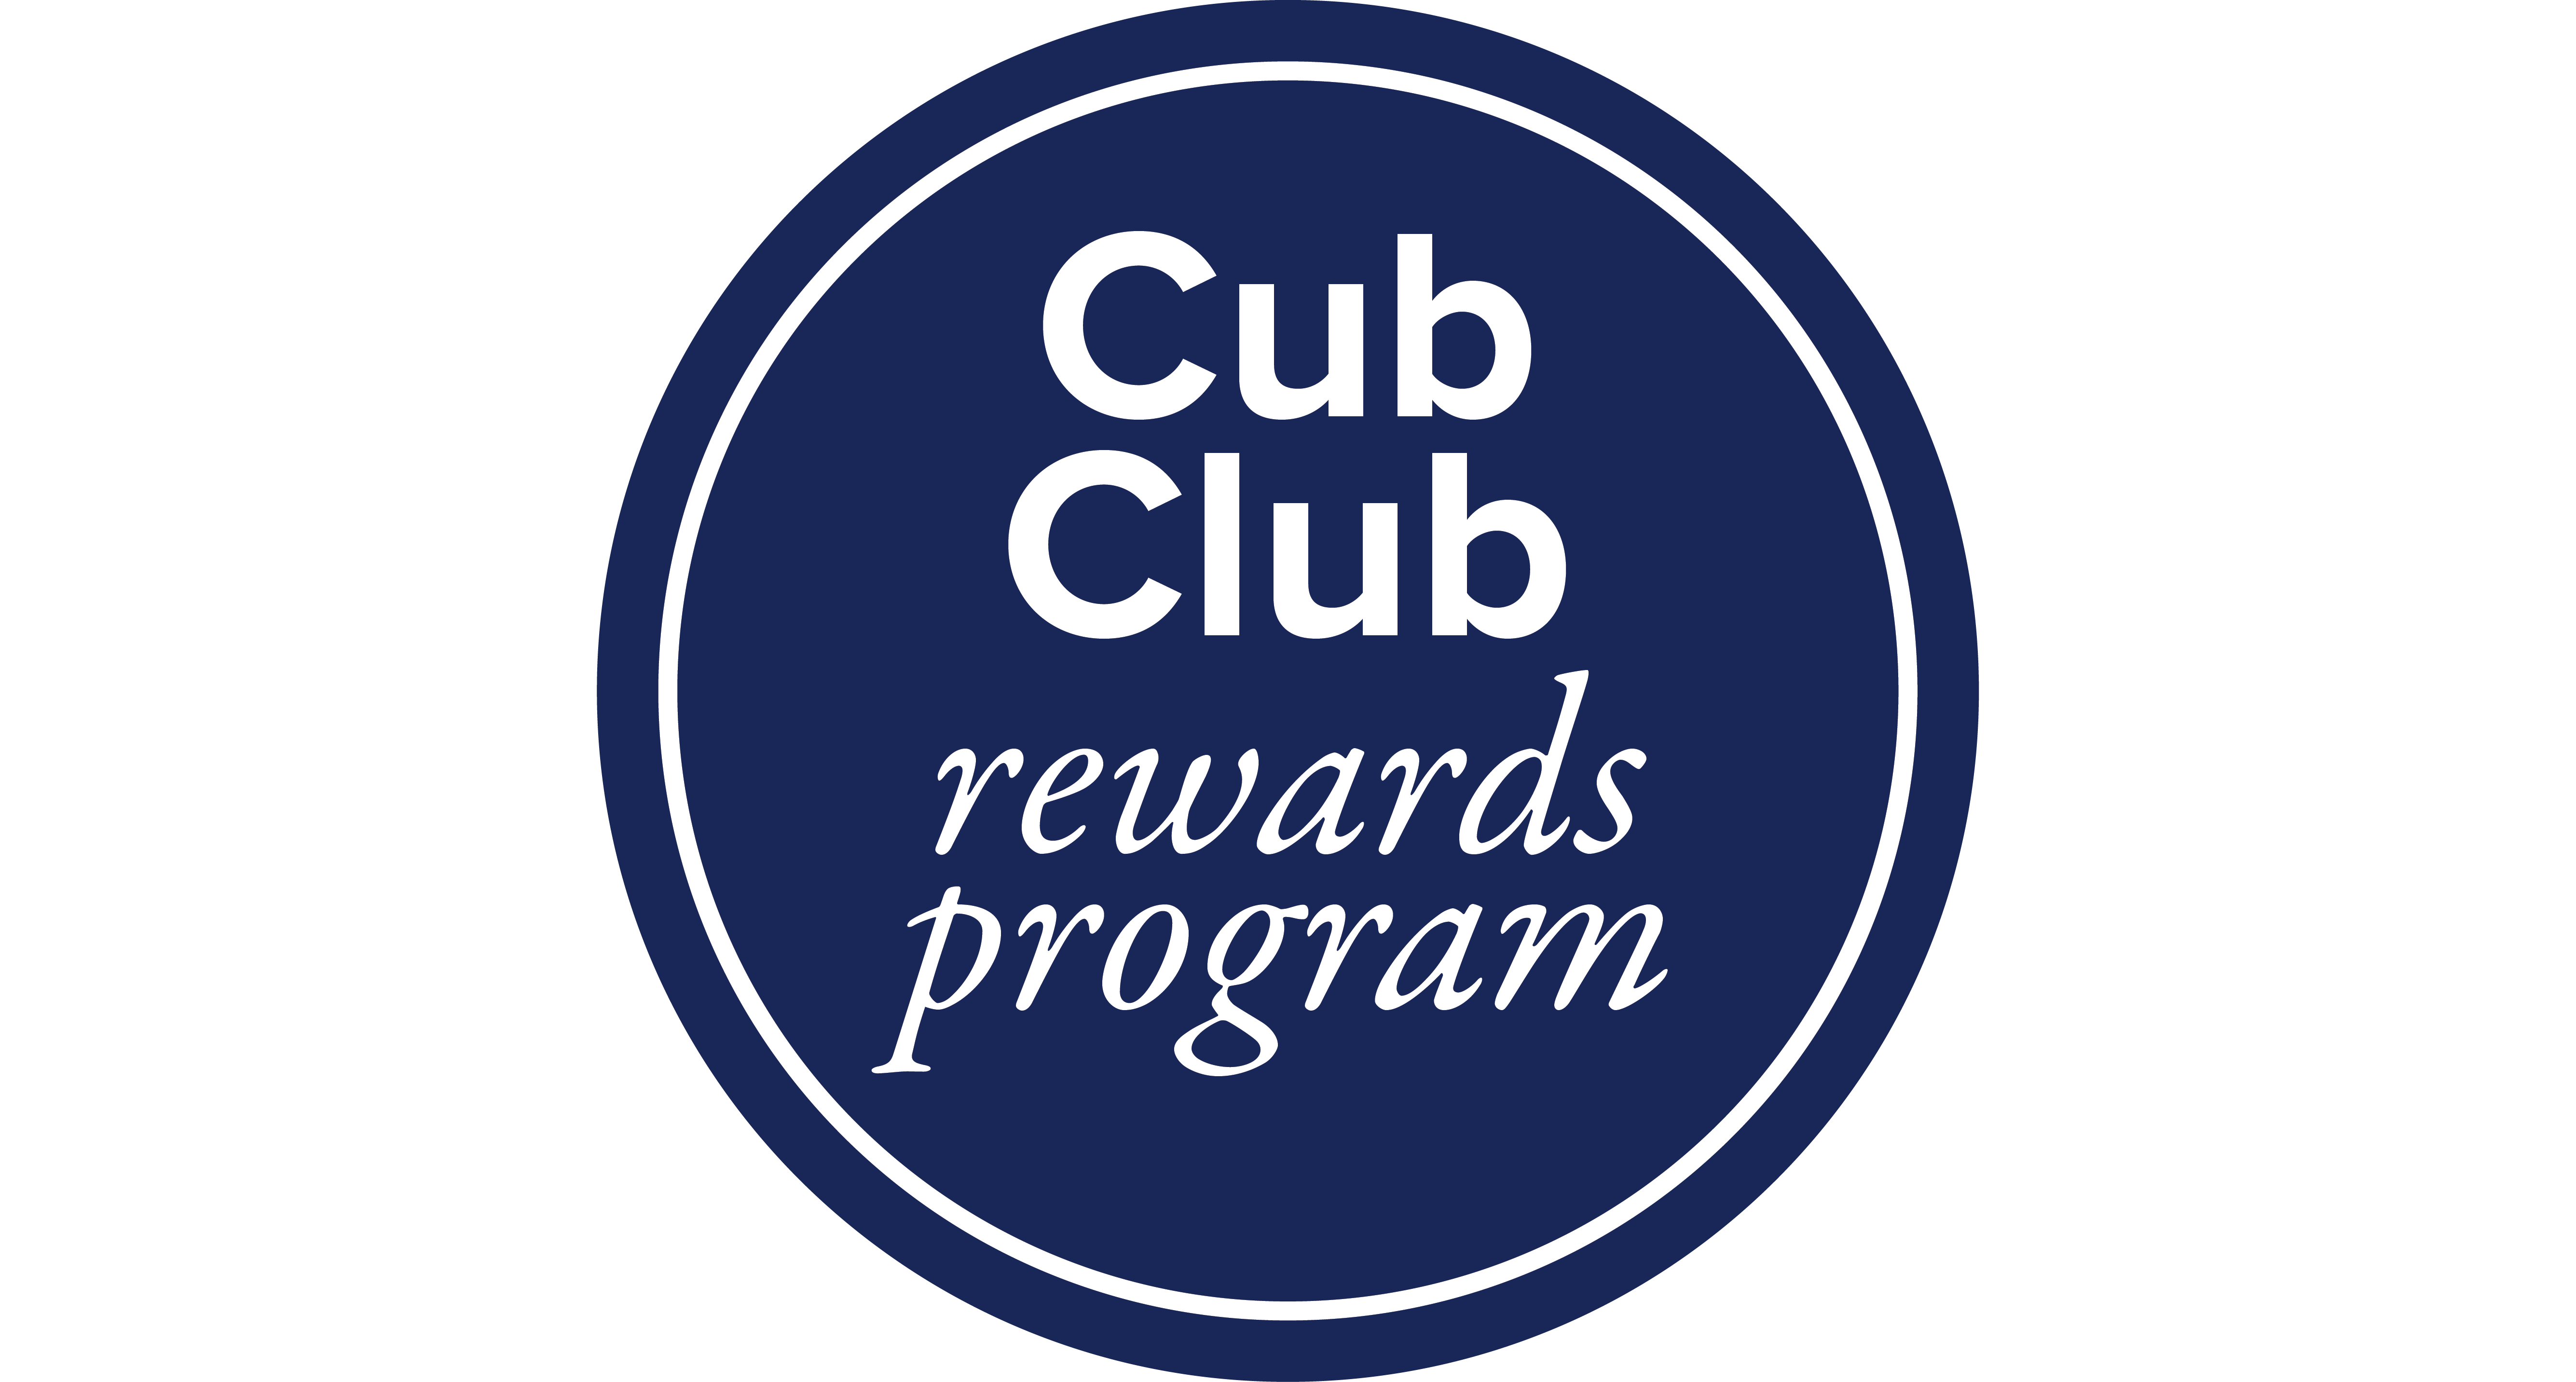 Click here to navigate to the Cub Club rewards program home page